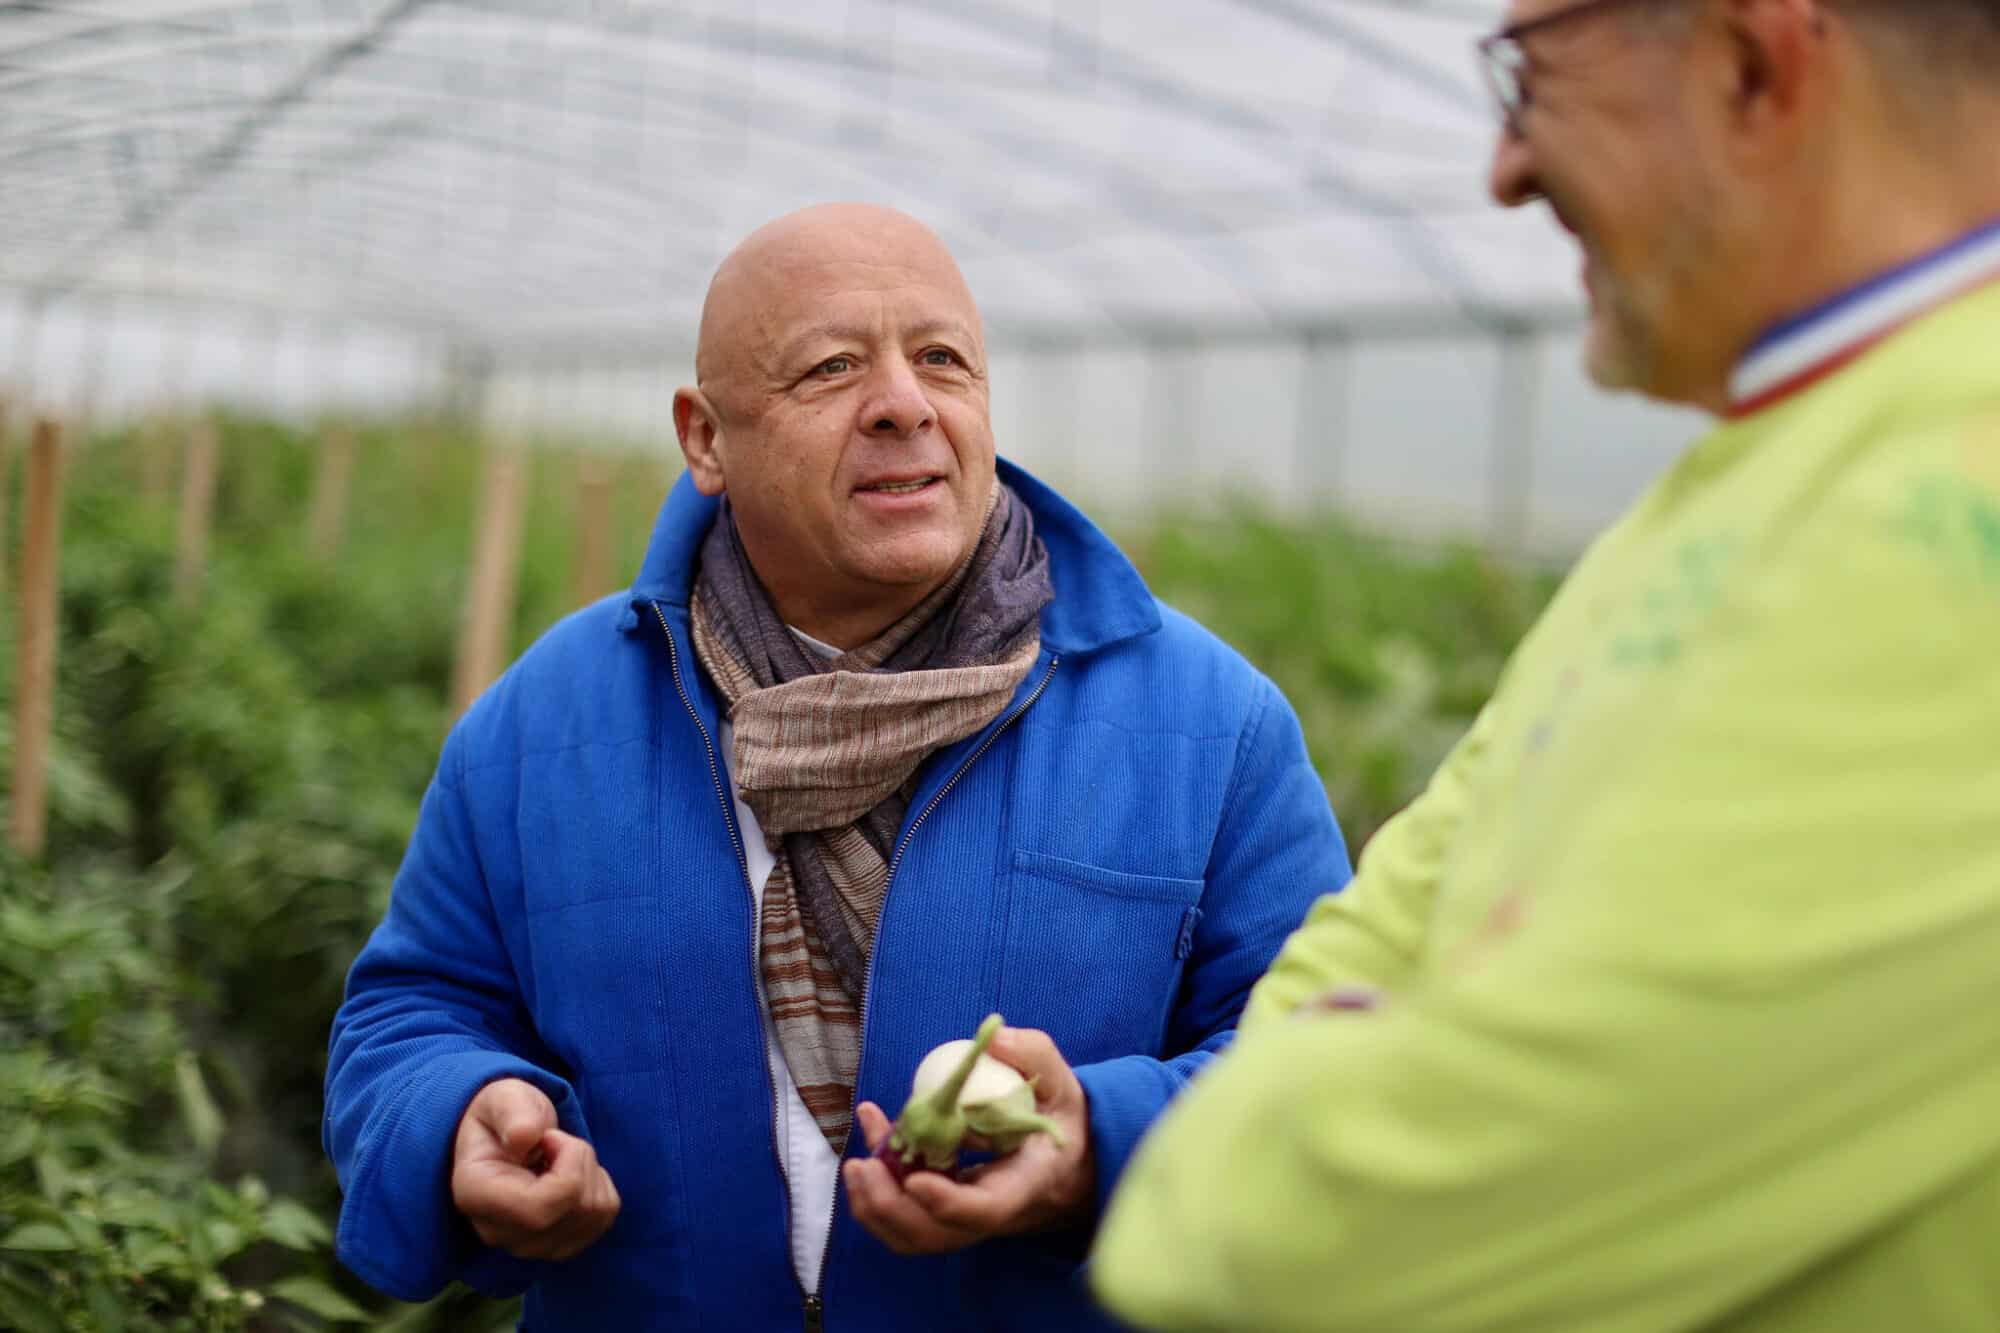 Chef Thierry Marx dressed in a blue winter jacket and beige scarf visits a greenhouse growing produce in Yvelines. 